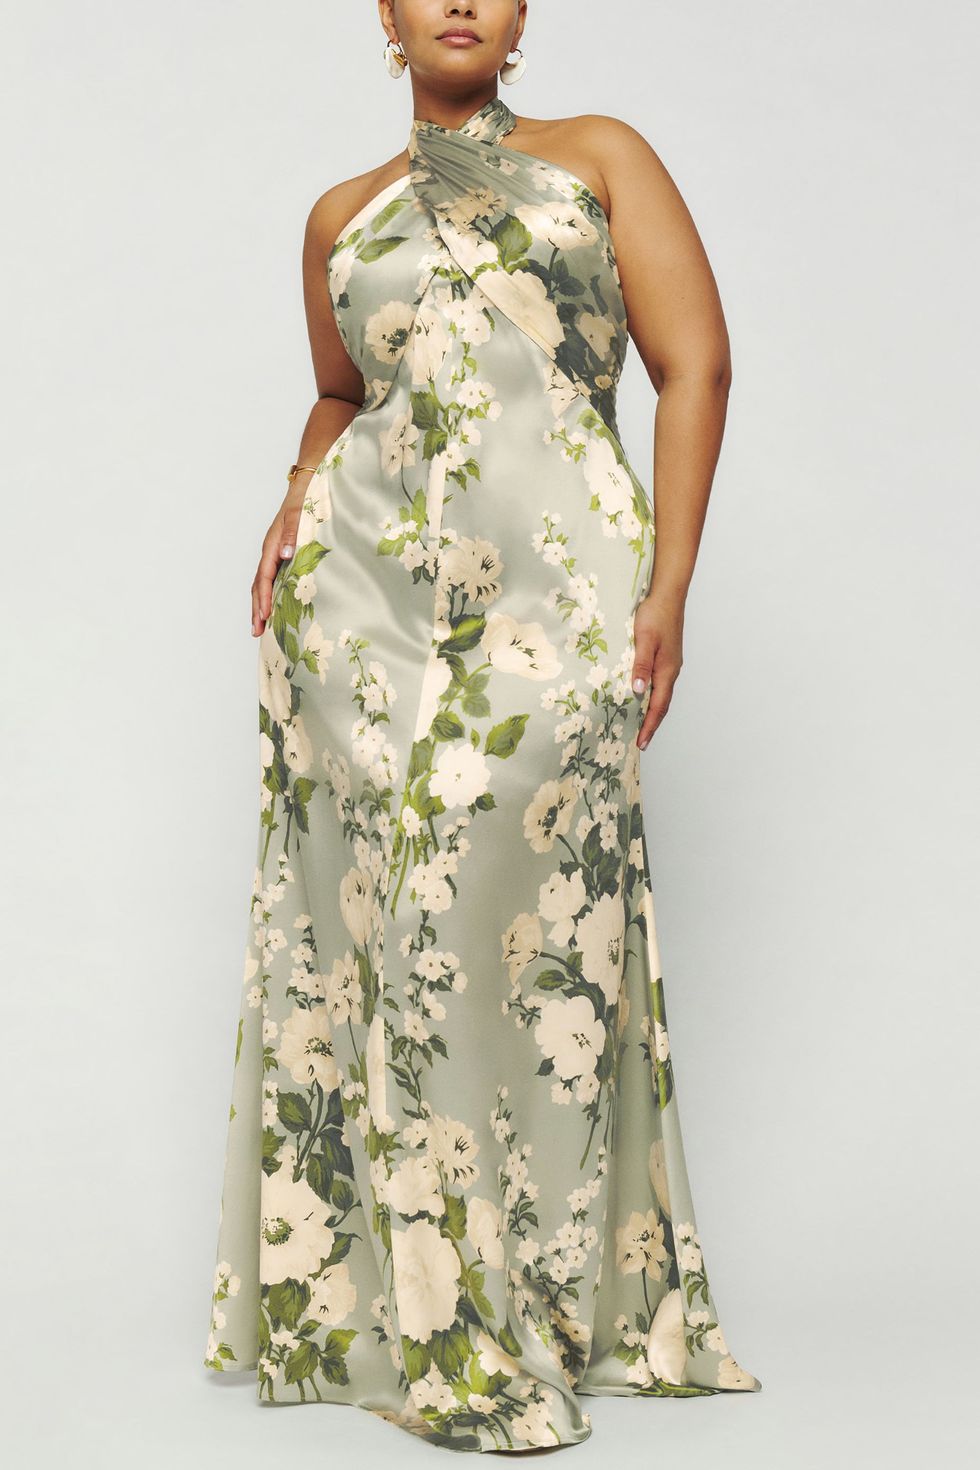 15 Plus-Size Wedding Guest Dresses That (Almost!) Steal The Show